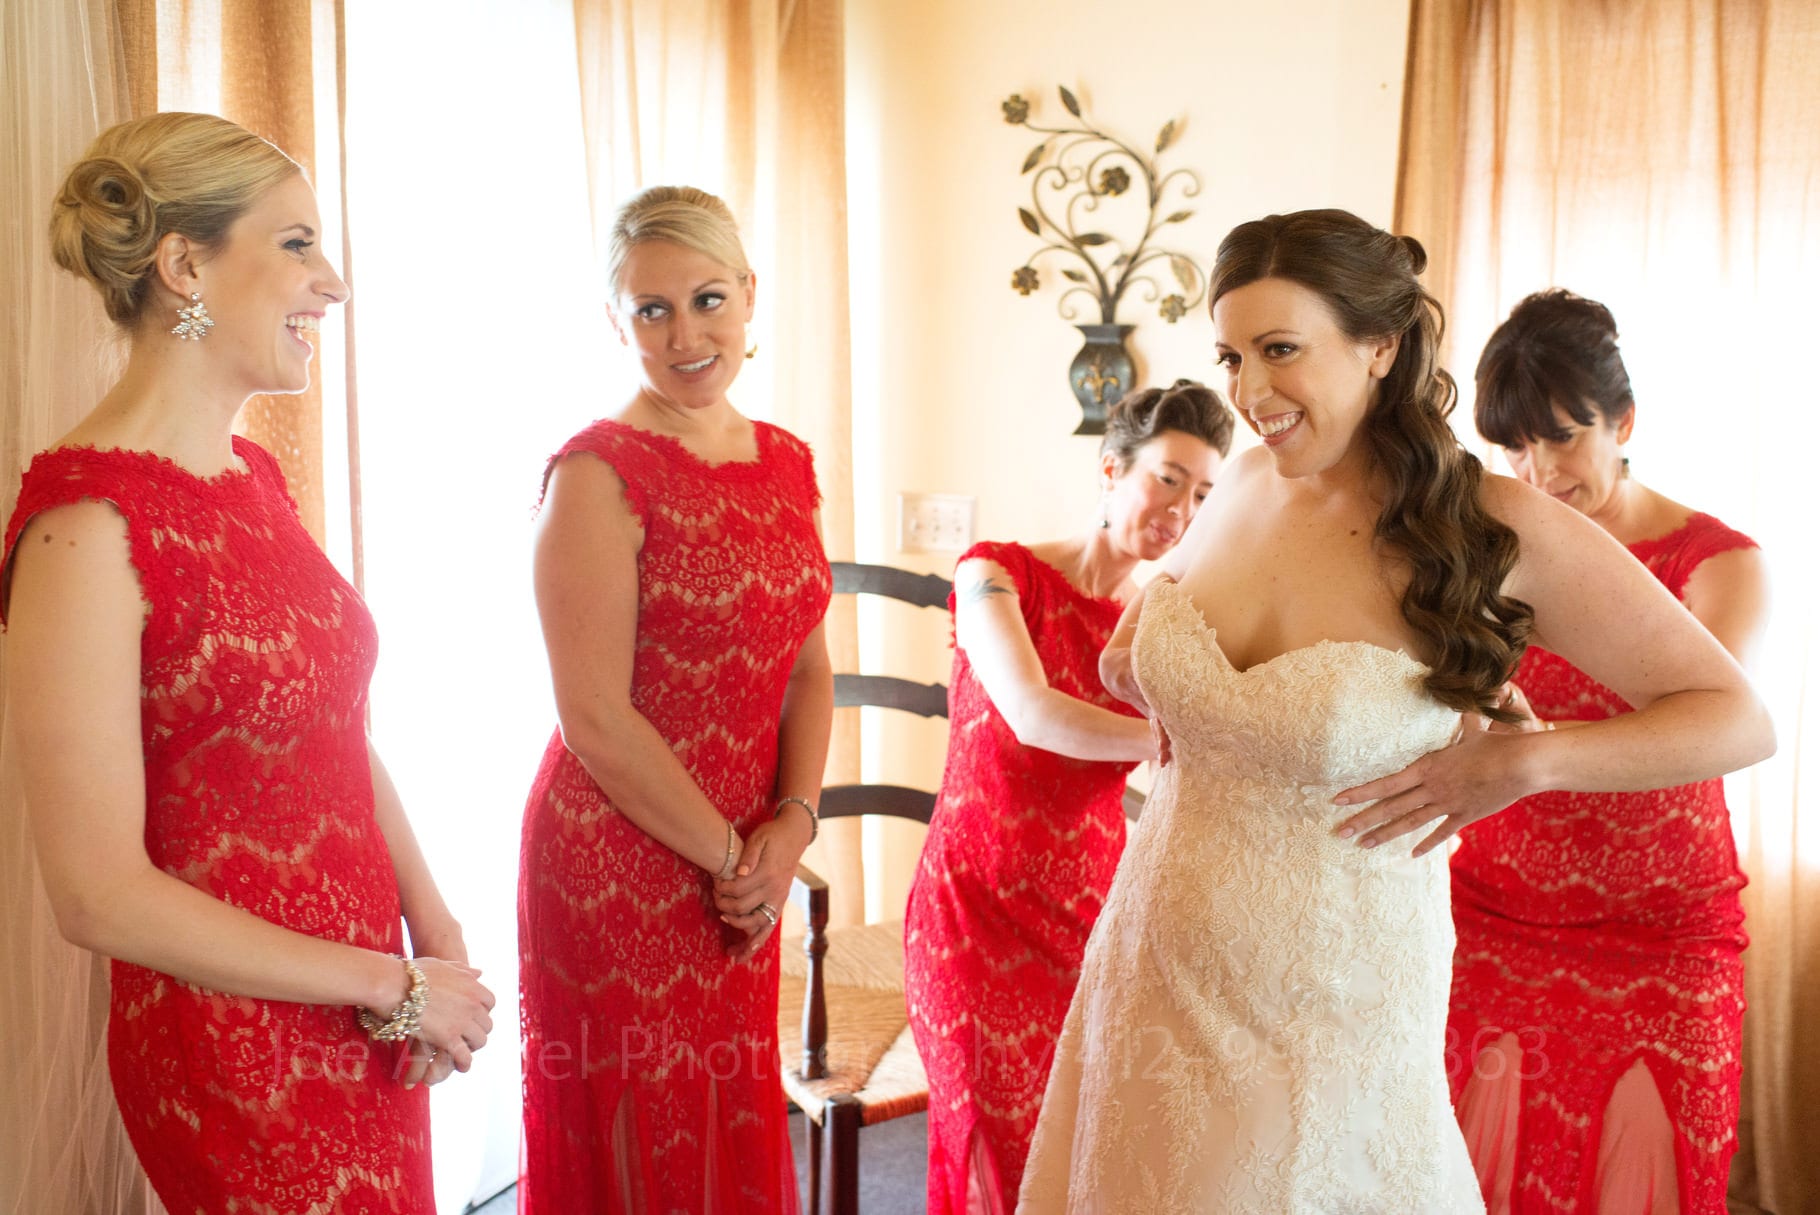 A bride smiles as she is helped into her wedding dress by four bridesmaids all dressed in red lace during their Chanteclaire Farm Wedding.